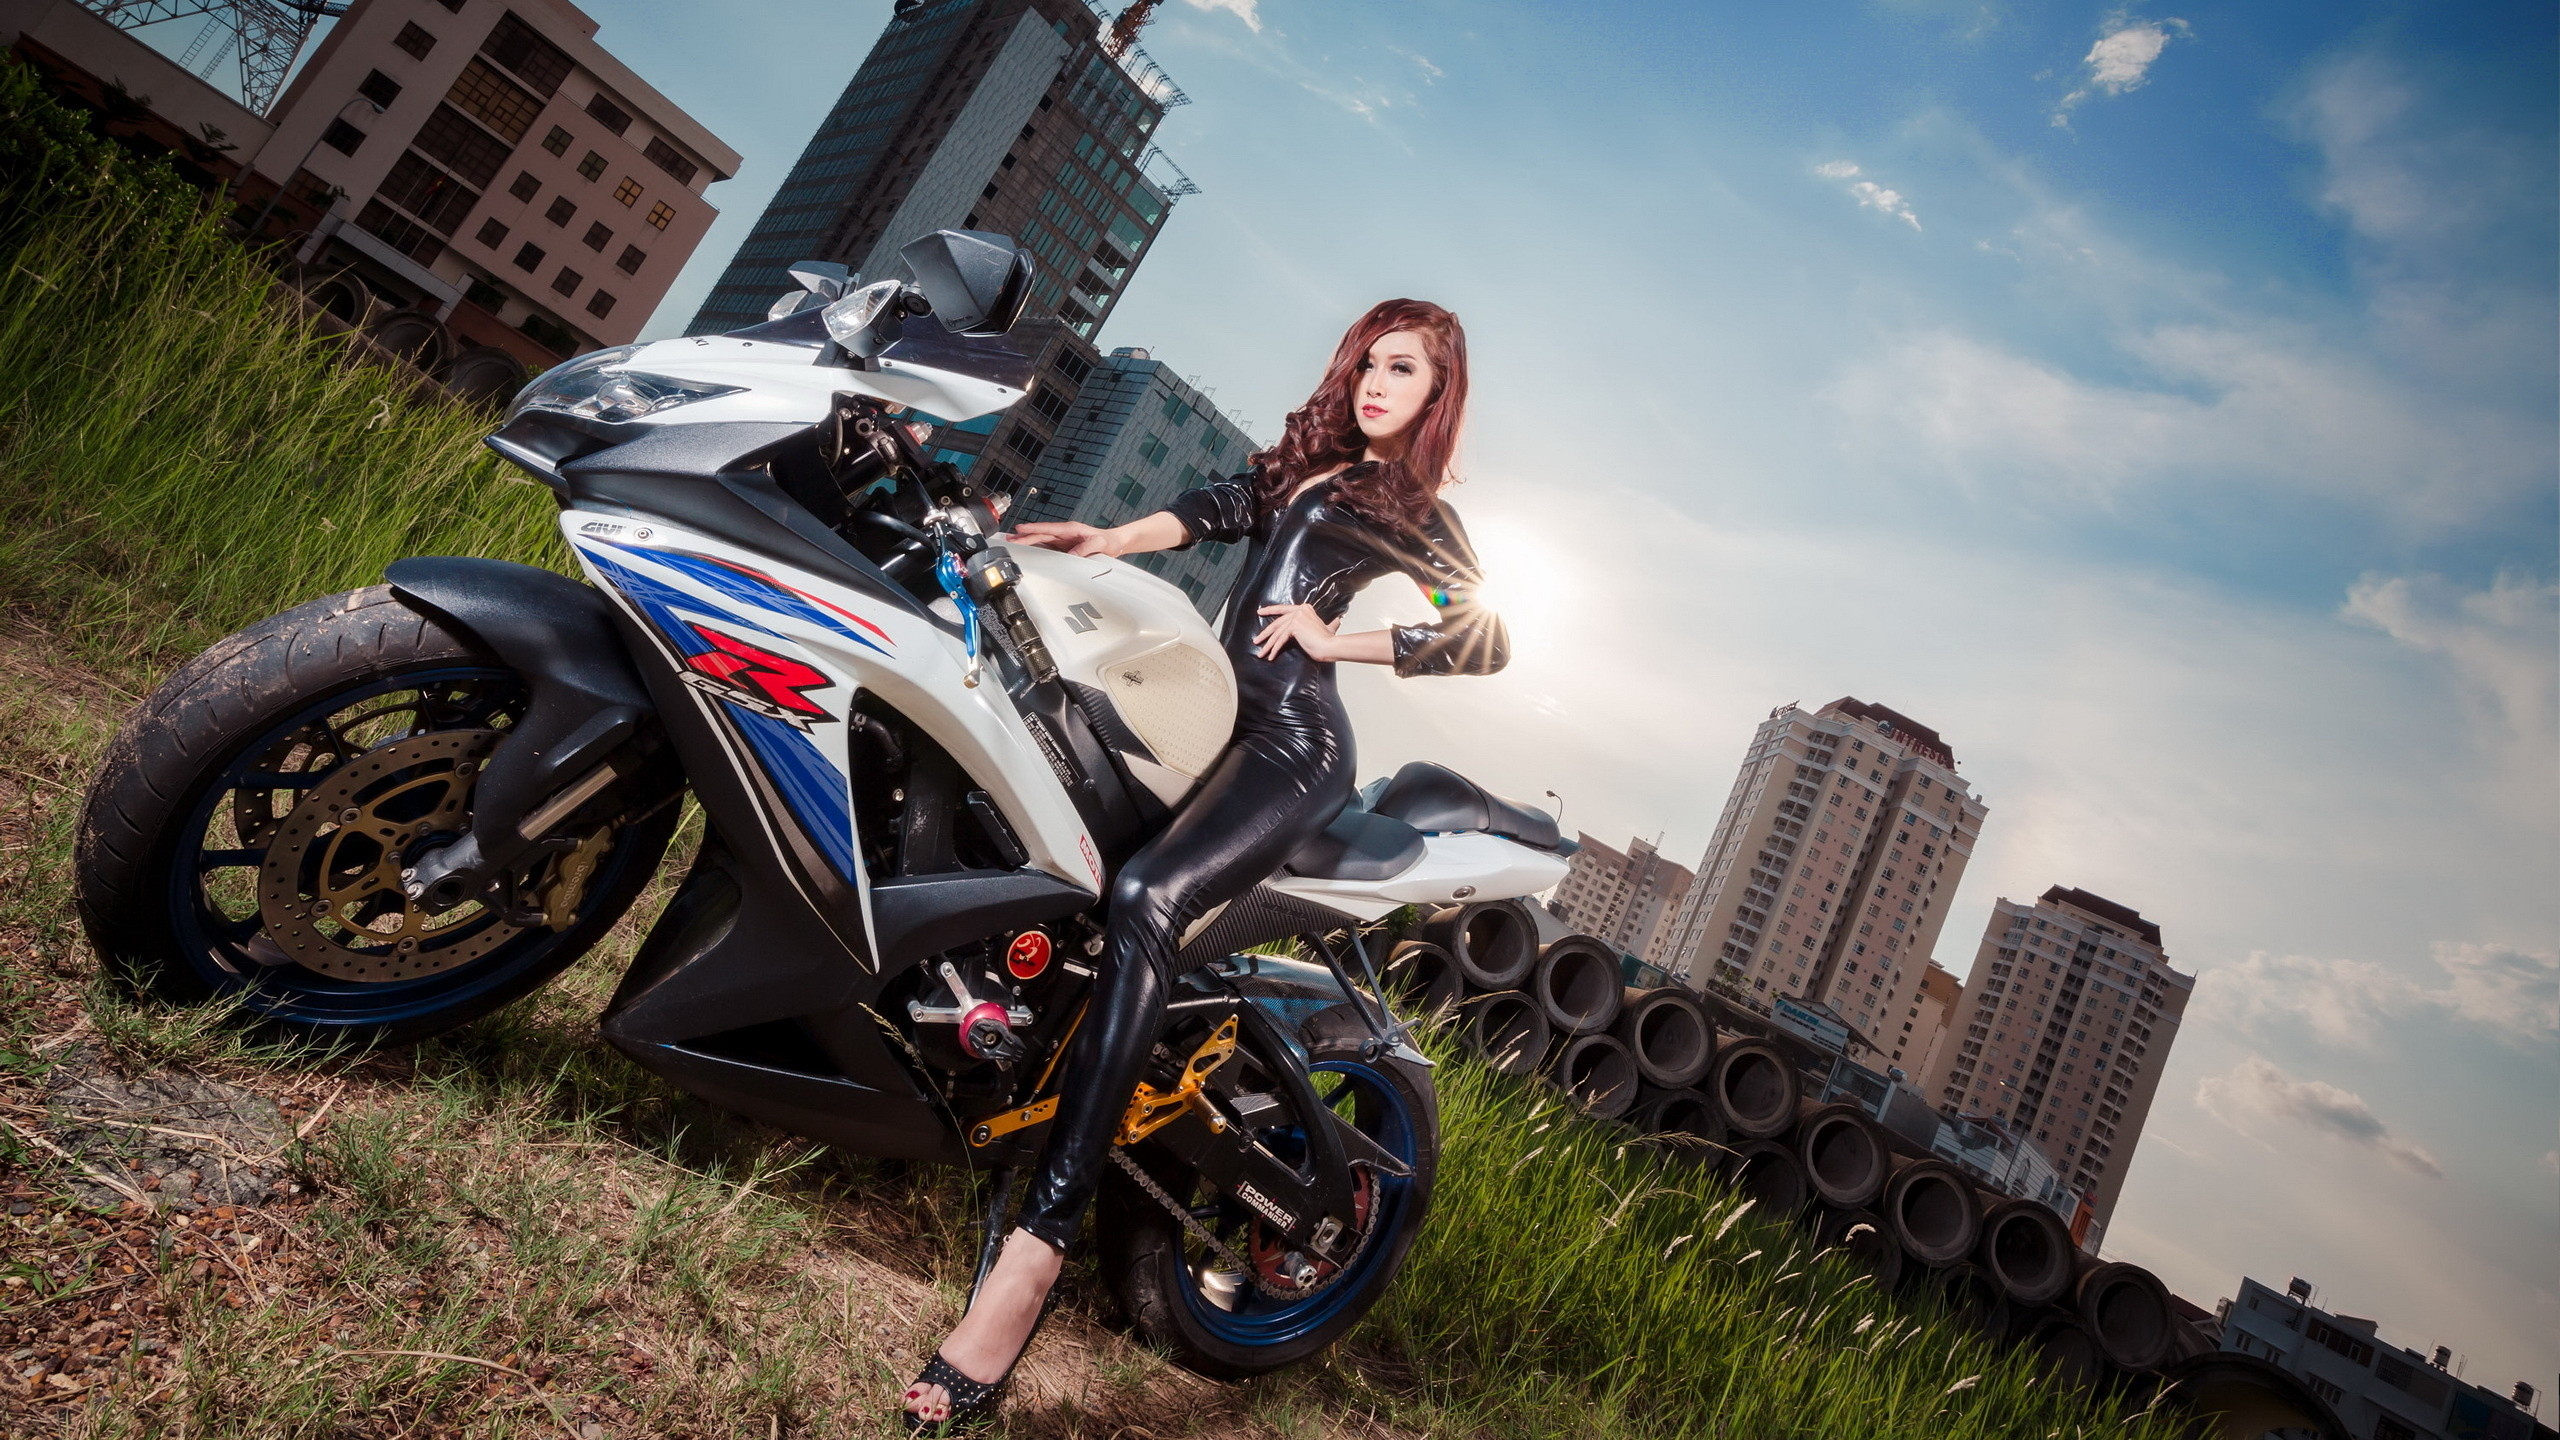 2560x1440 HD Wallpapers Motorcycles And Girls, Amazing 46 Wallpapers of .